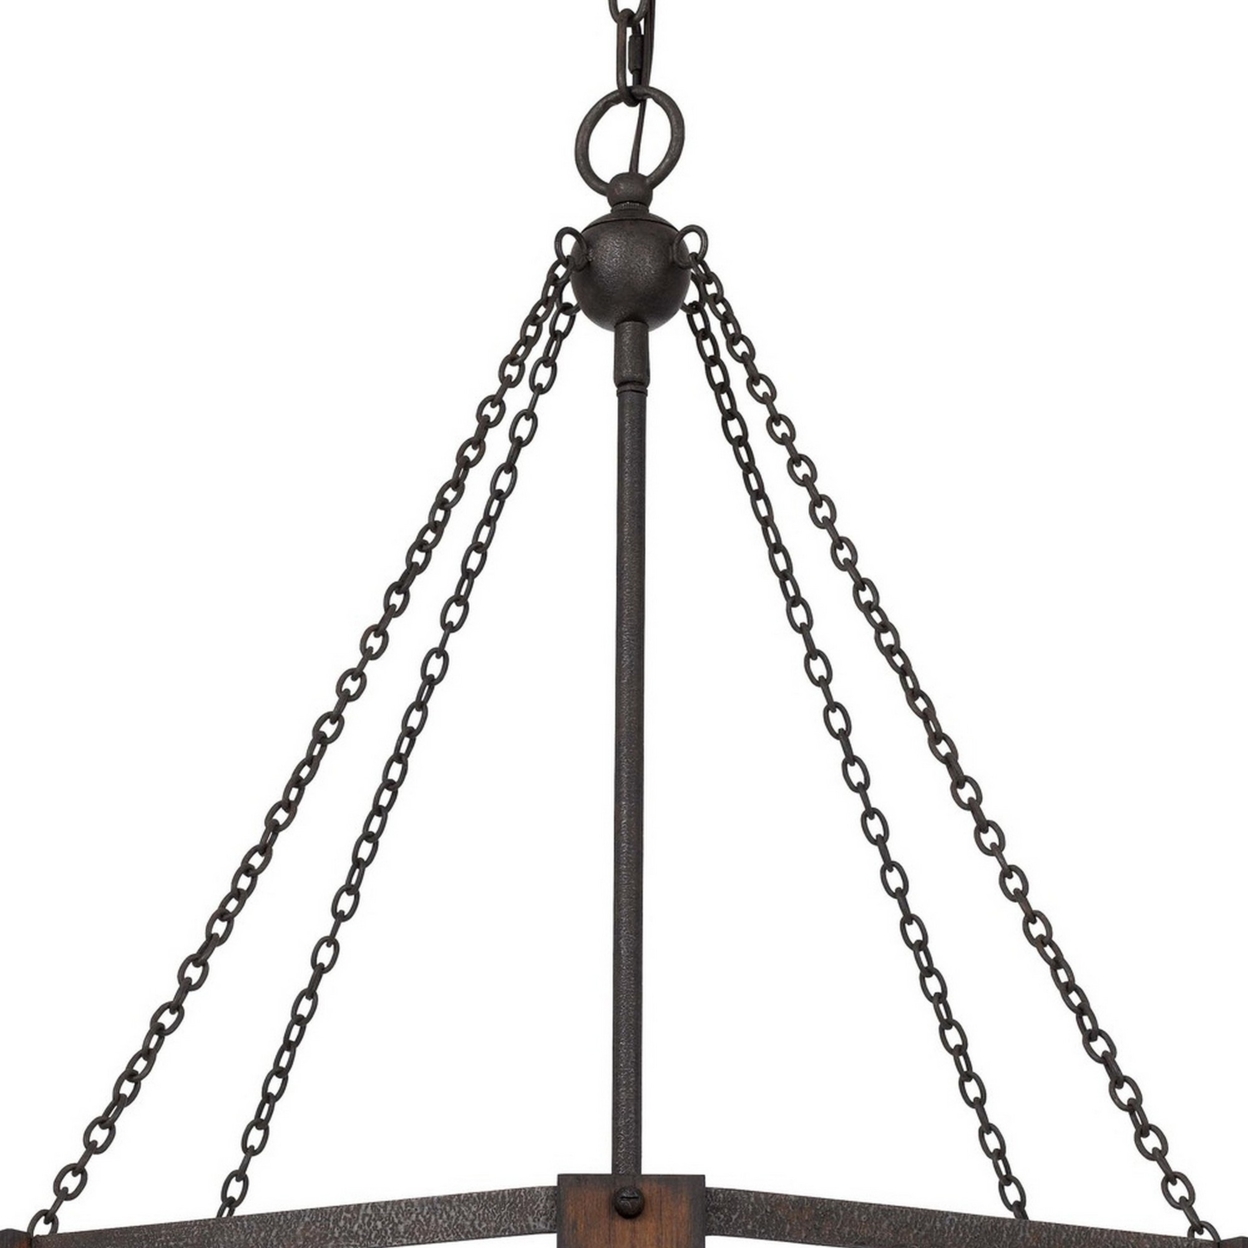 Chandelier With Octagonal Cage Design Metal Frame And Wood Accents, Brown- Saltoro Sherpi